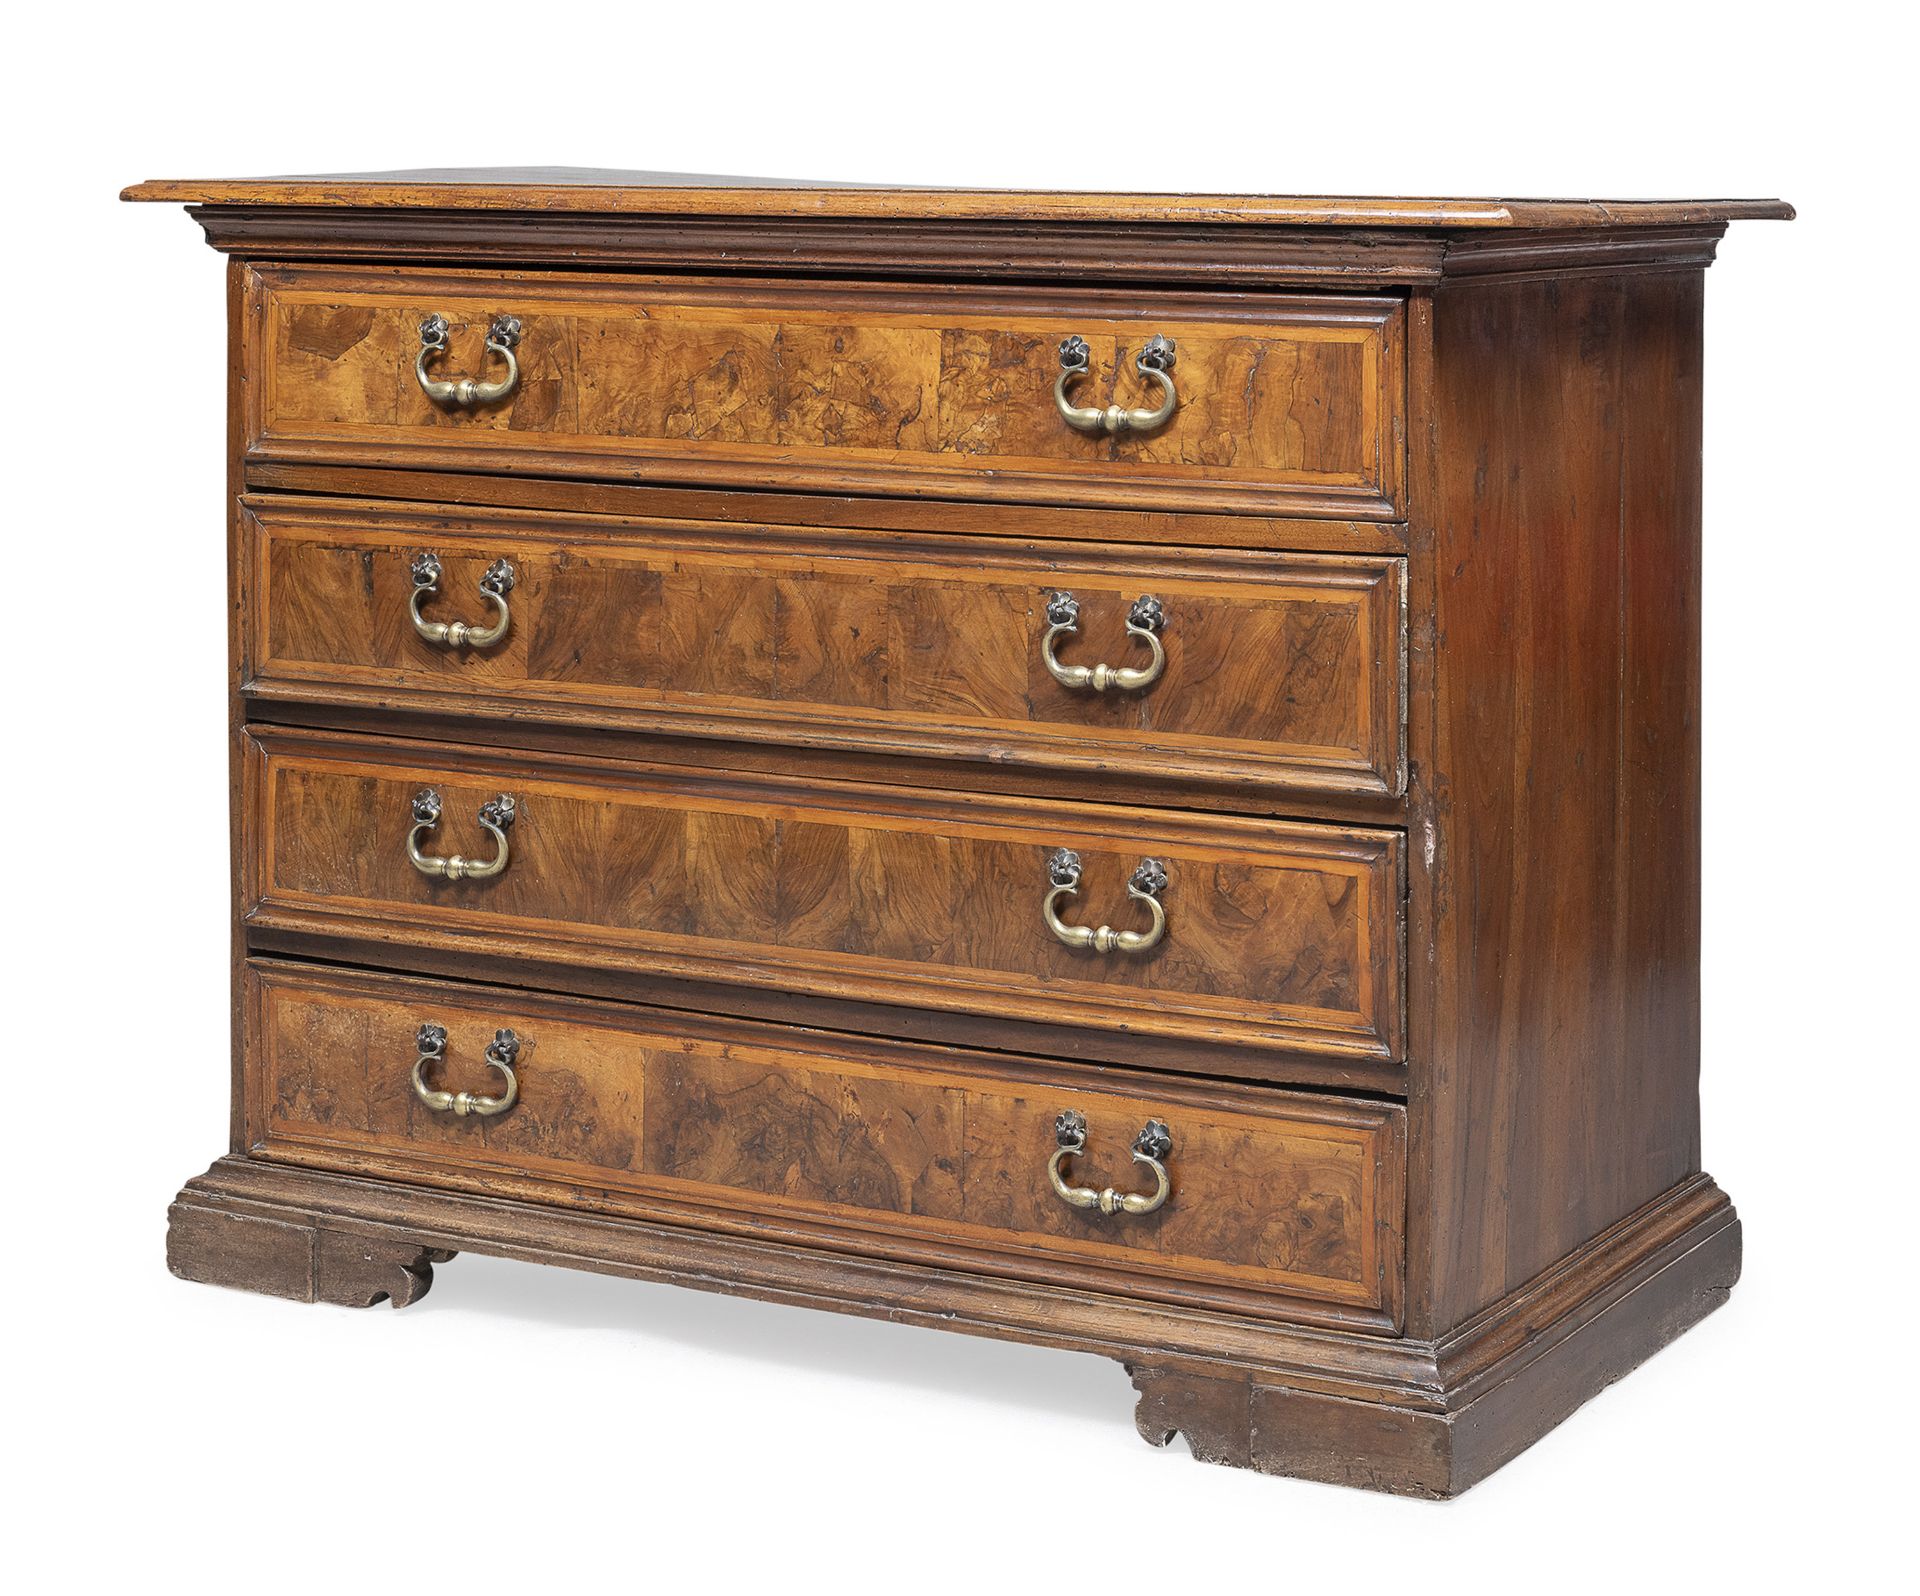 WALNUT CHEST OF DRAWERS CENTRAL ITALY 18TH CENTURY